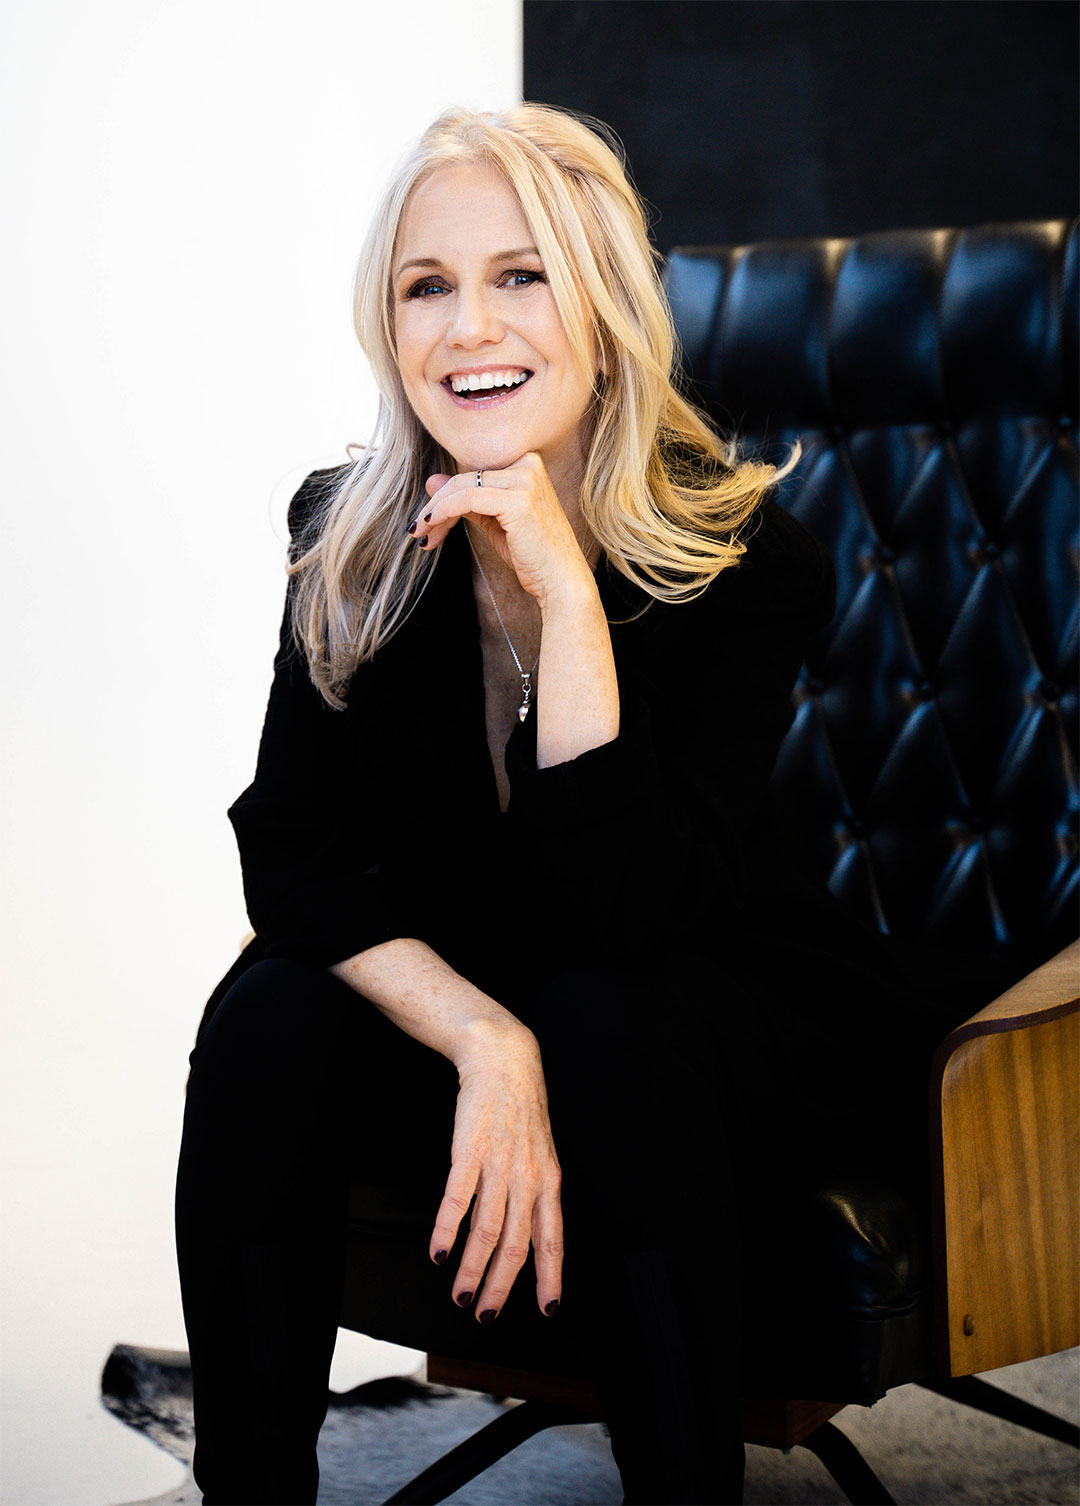 Nina Rolle smiling and wearing a black suit while sitting in a black leather armchair